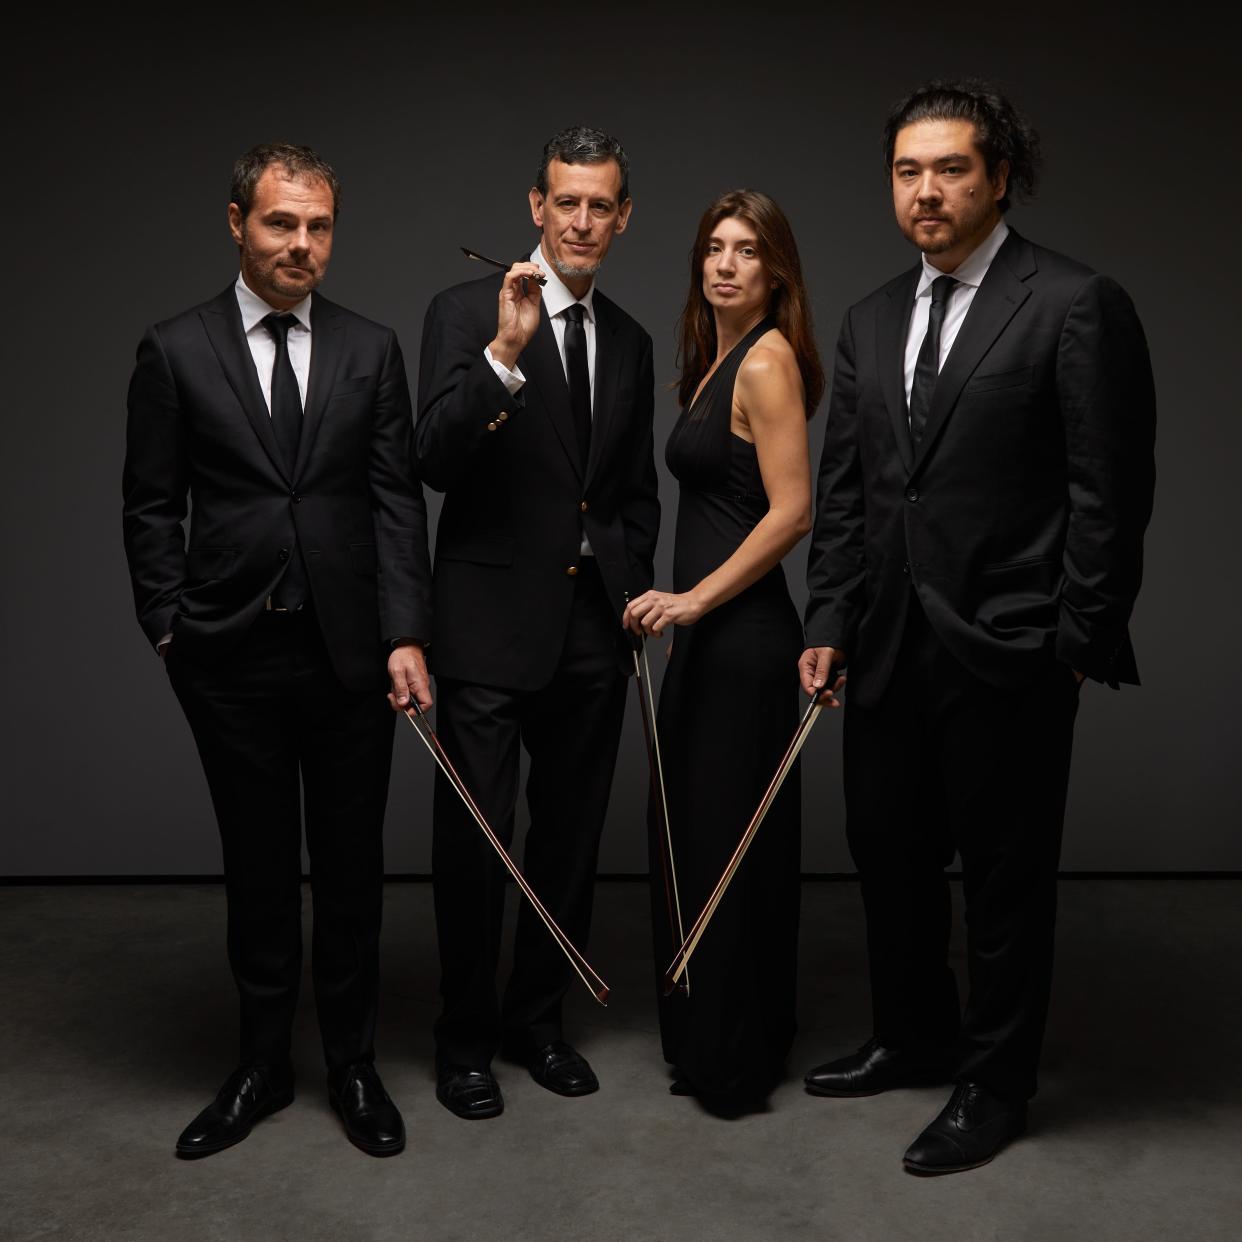 Those aren't lightsabers The Euclid Quartet — violinist Jameson Cooper, left, violist Luis Enrique Vargas, violinist Aviva Hakanoglu and cellist Justin Goldsmith — are holding. But on May 4, 2023, they'll use their bows to perform selections from the soundtracks to "Star Wars" films at “May the Fourth Be With You: A Star Wars Celebration w/ the Euclid Quartet” at Century Center in South Bend.